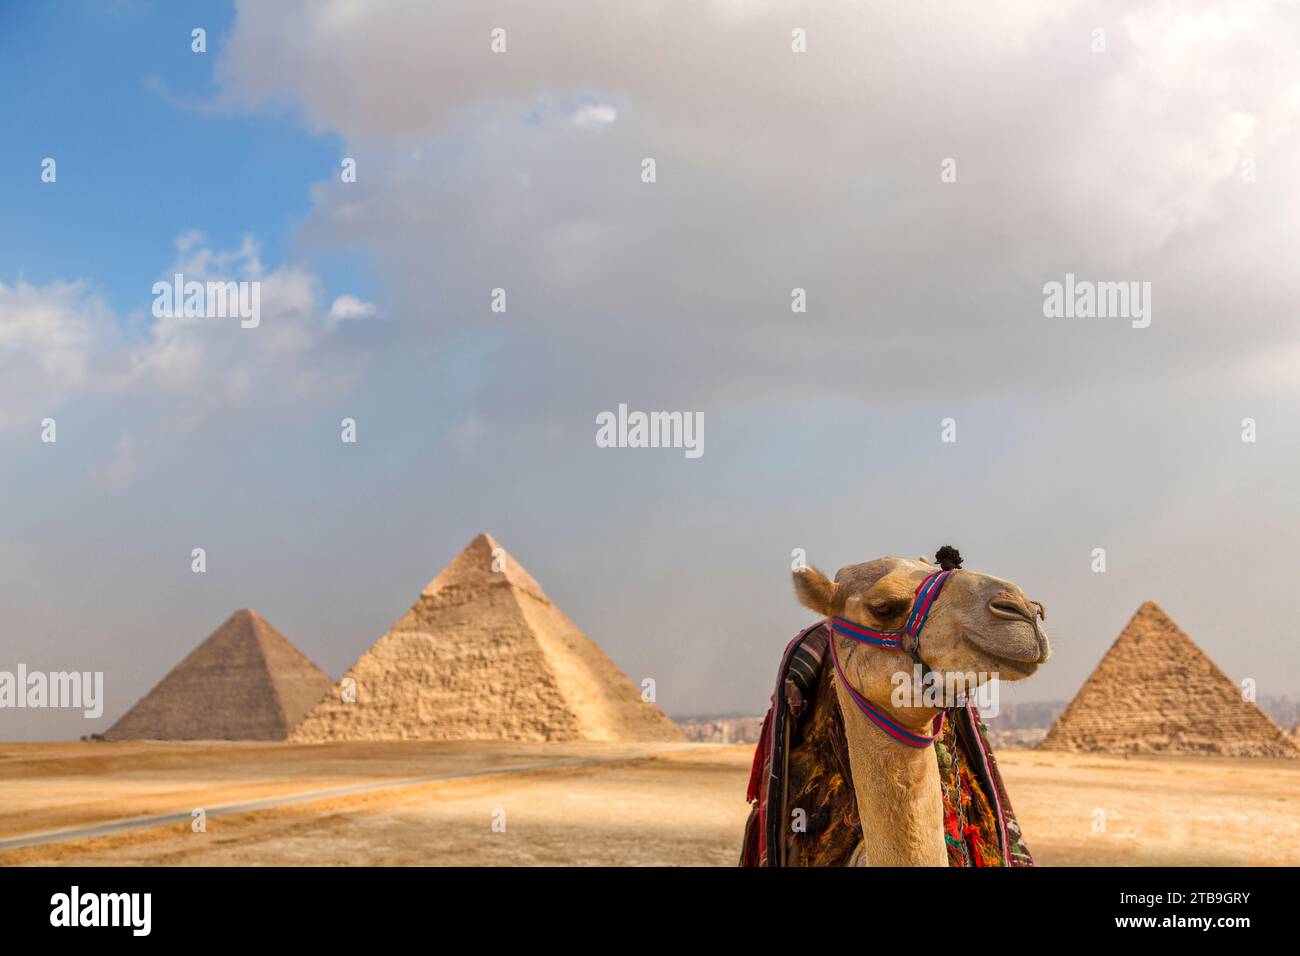 Close-up of a camel (Camelus) with the Great Pyramids of Giza in the distance under a dramatic sky; Giza, Cairo, Egypt Stock Photo